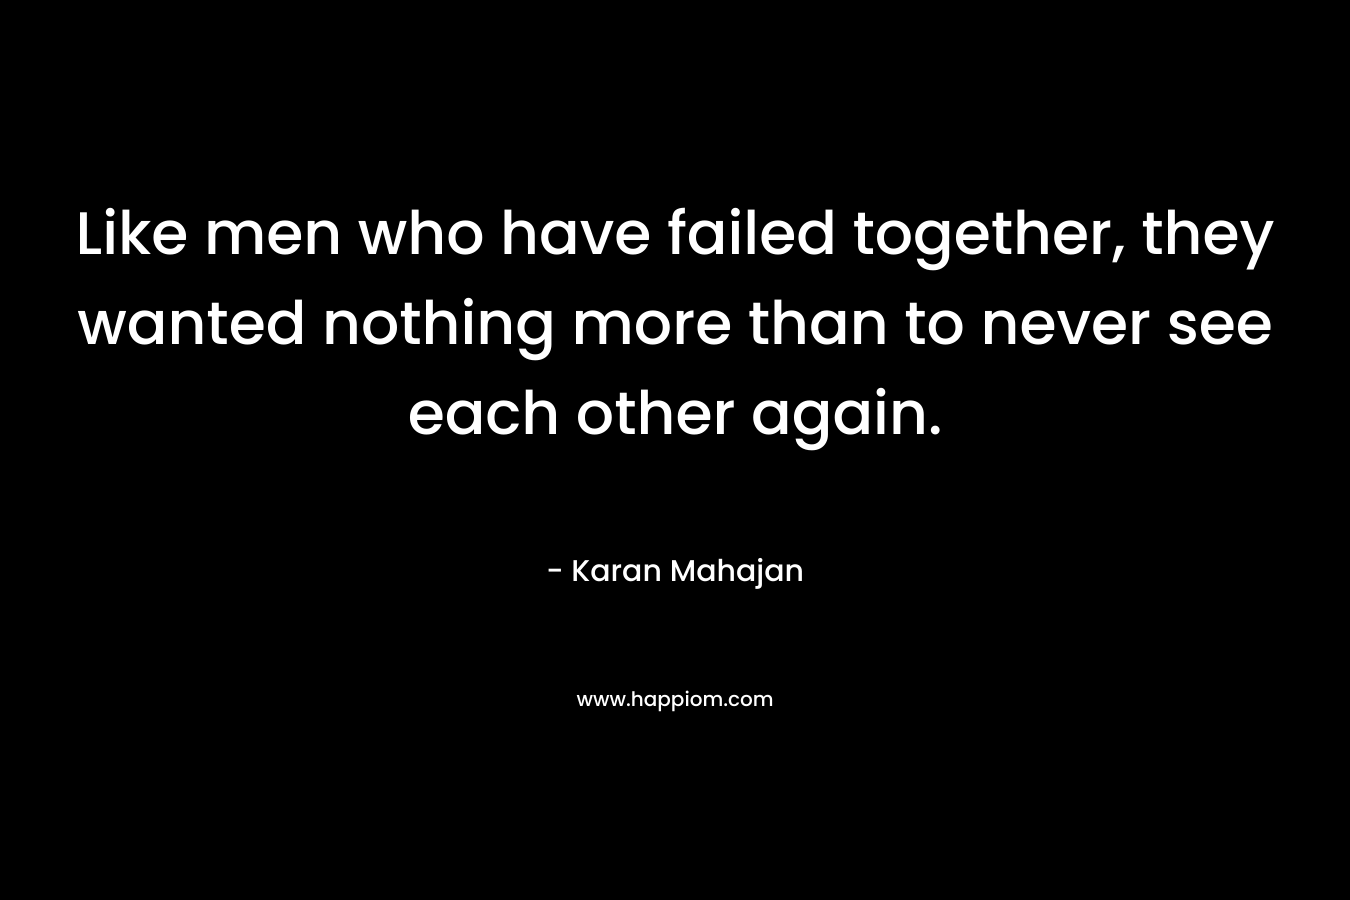 Like men who have failed together, they wanted nothing more than to never see each other again.